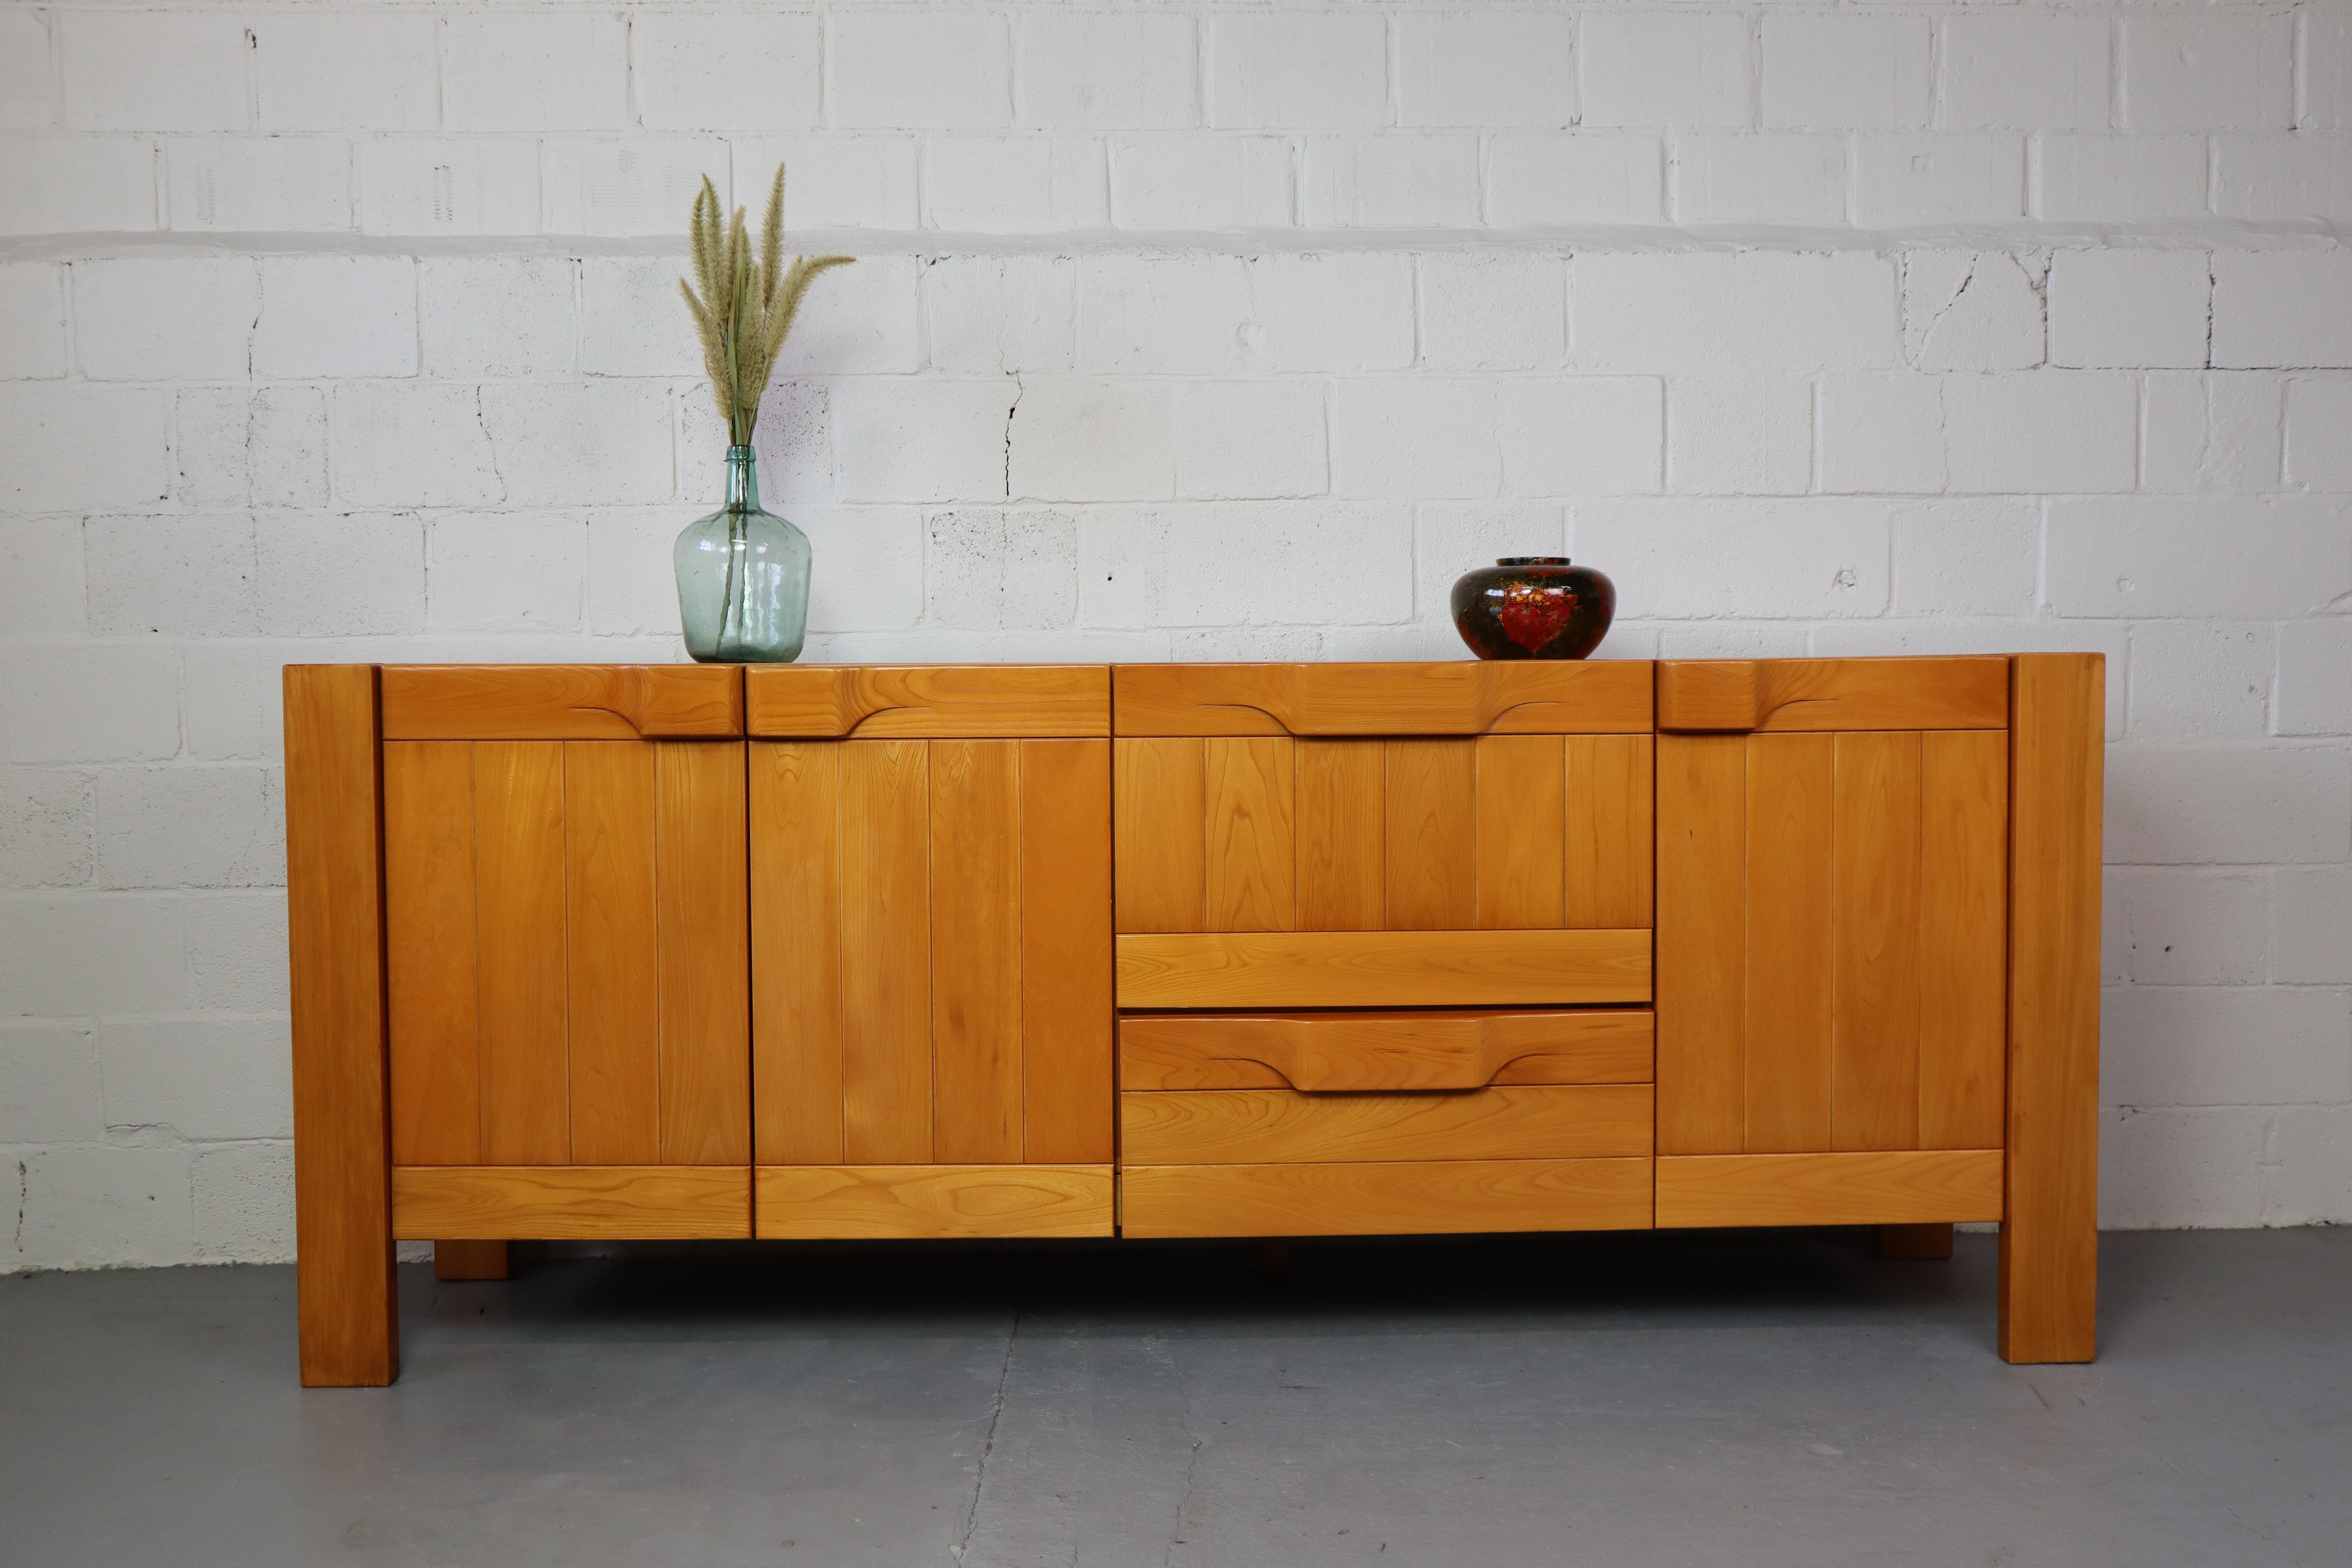 Brutalist solid Elm sideboard by Maison Regain, France.  The large curved handles which have been carved from a single piece of solid wood  are very typical for Maison Regains designs.
The cabinet has one drawer and a flap door above it. The